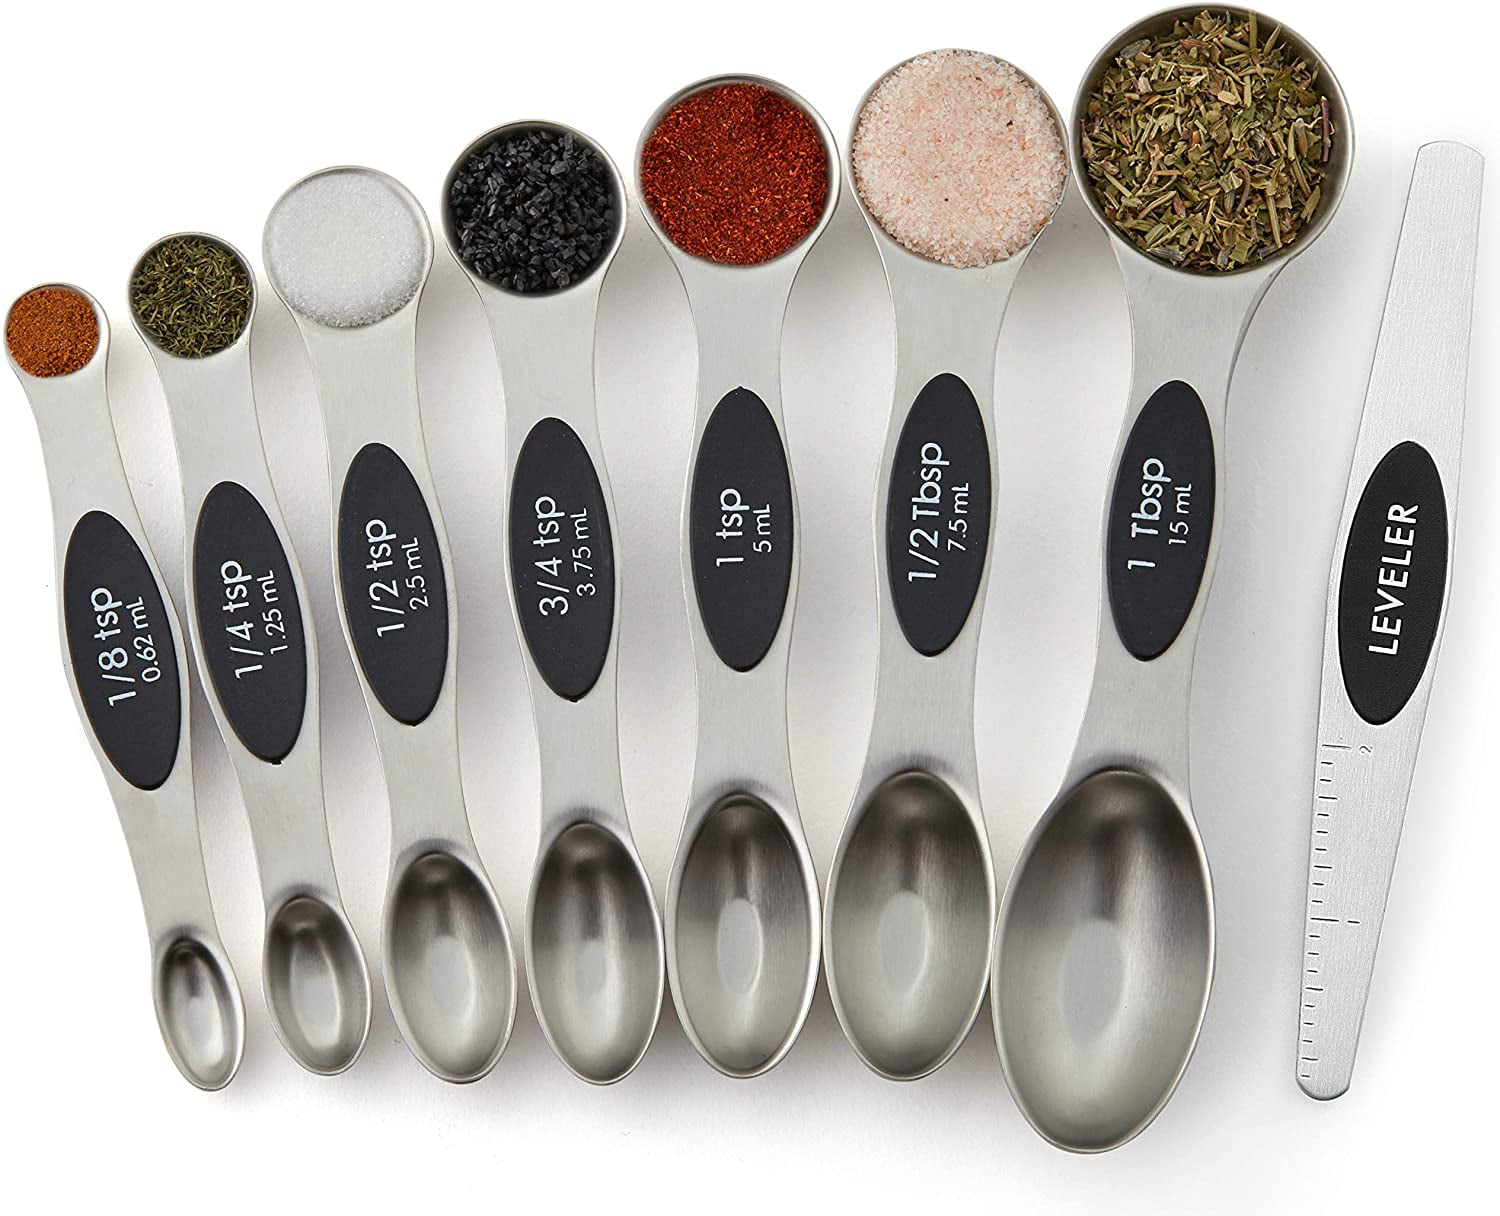 Fits in Spice Jars Dual Sided Stainless Steel Spring Chef Magnetic Measuring Spoons Set Set of 7 